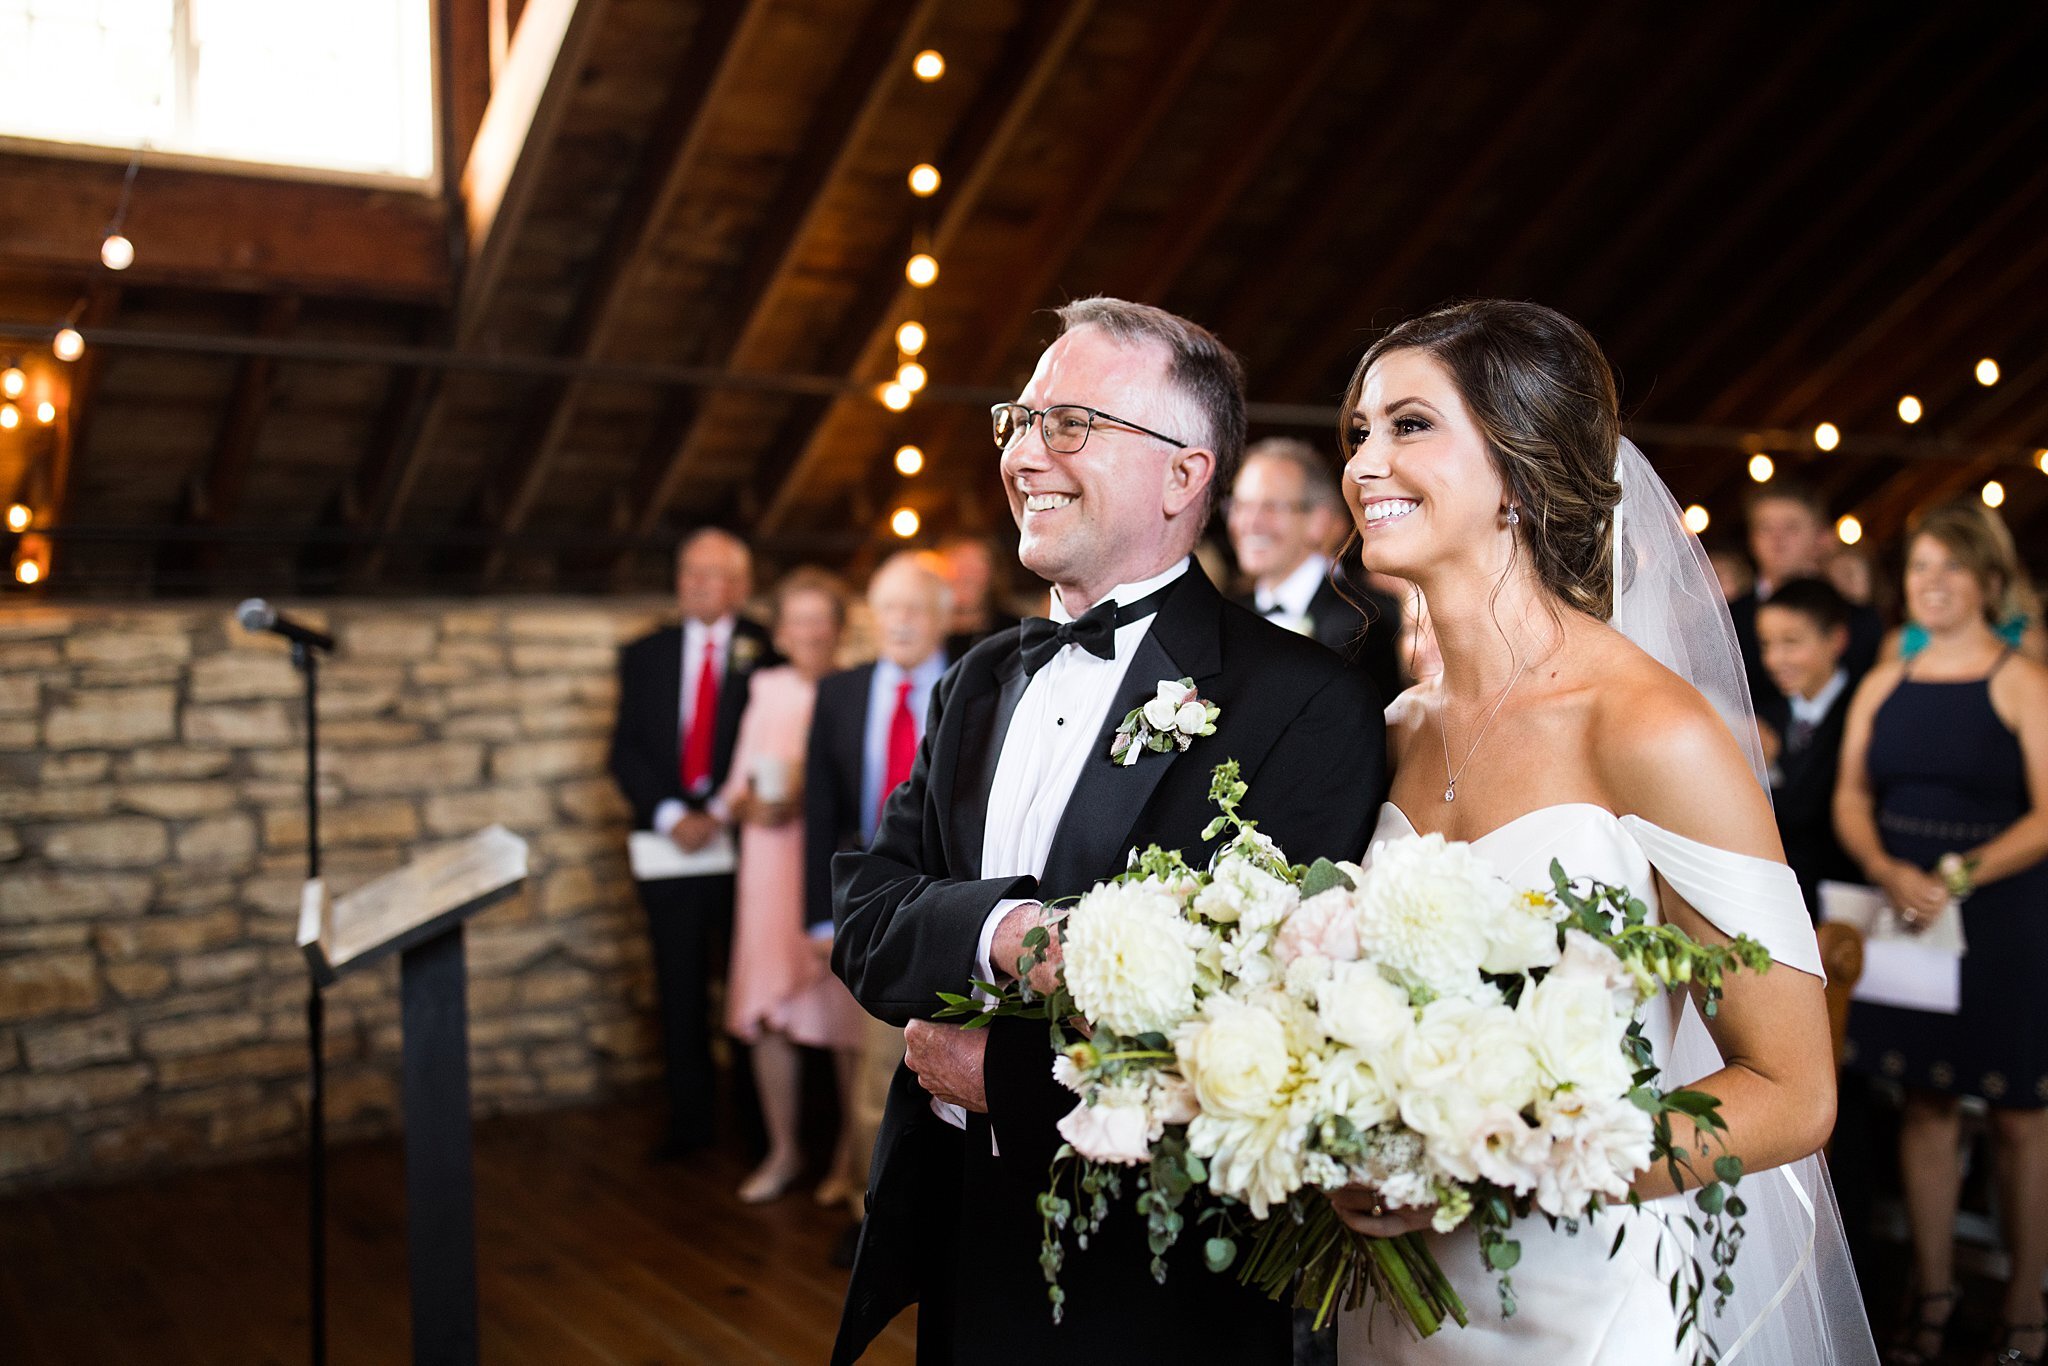  Bride and her father with large smiles walking down the aisle. 